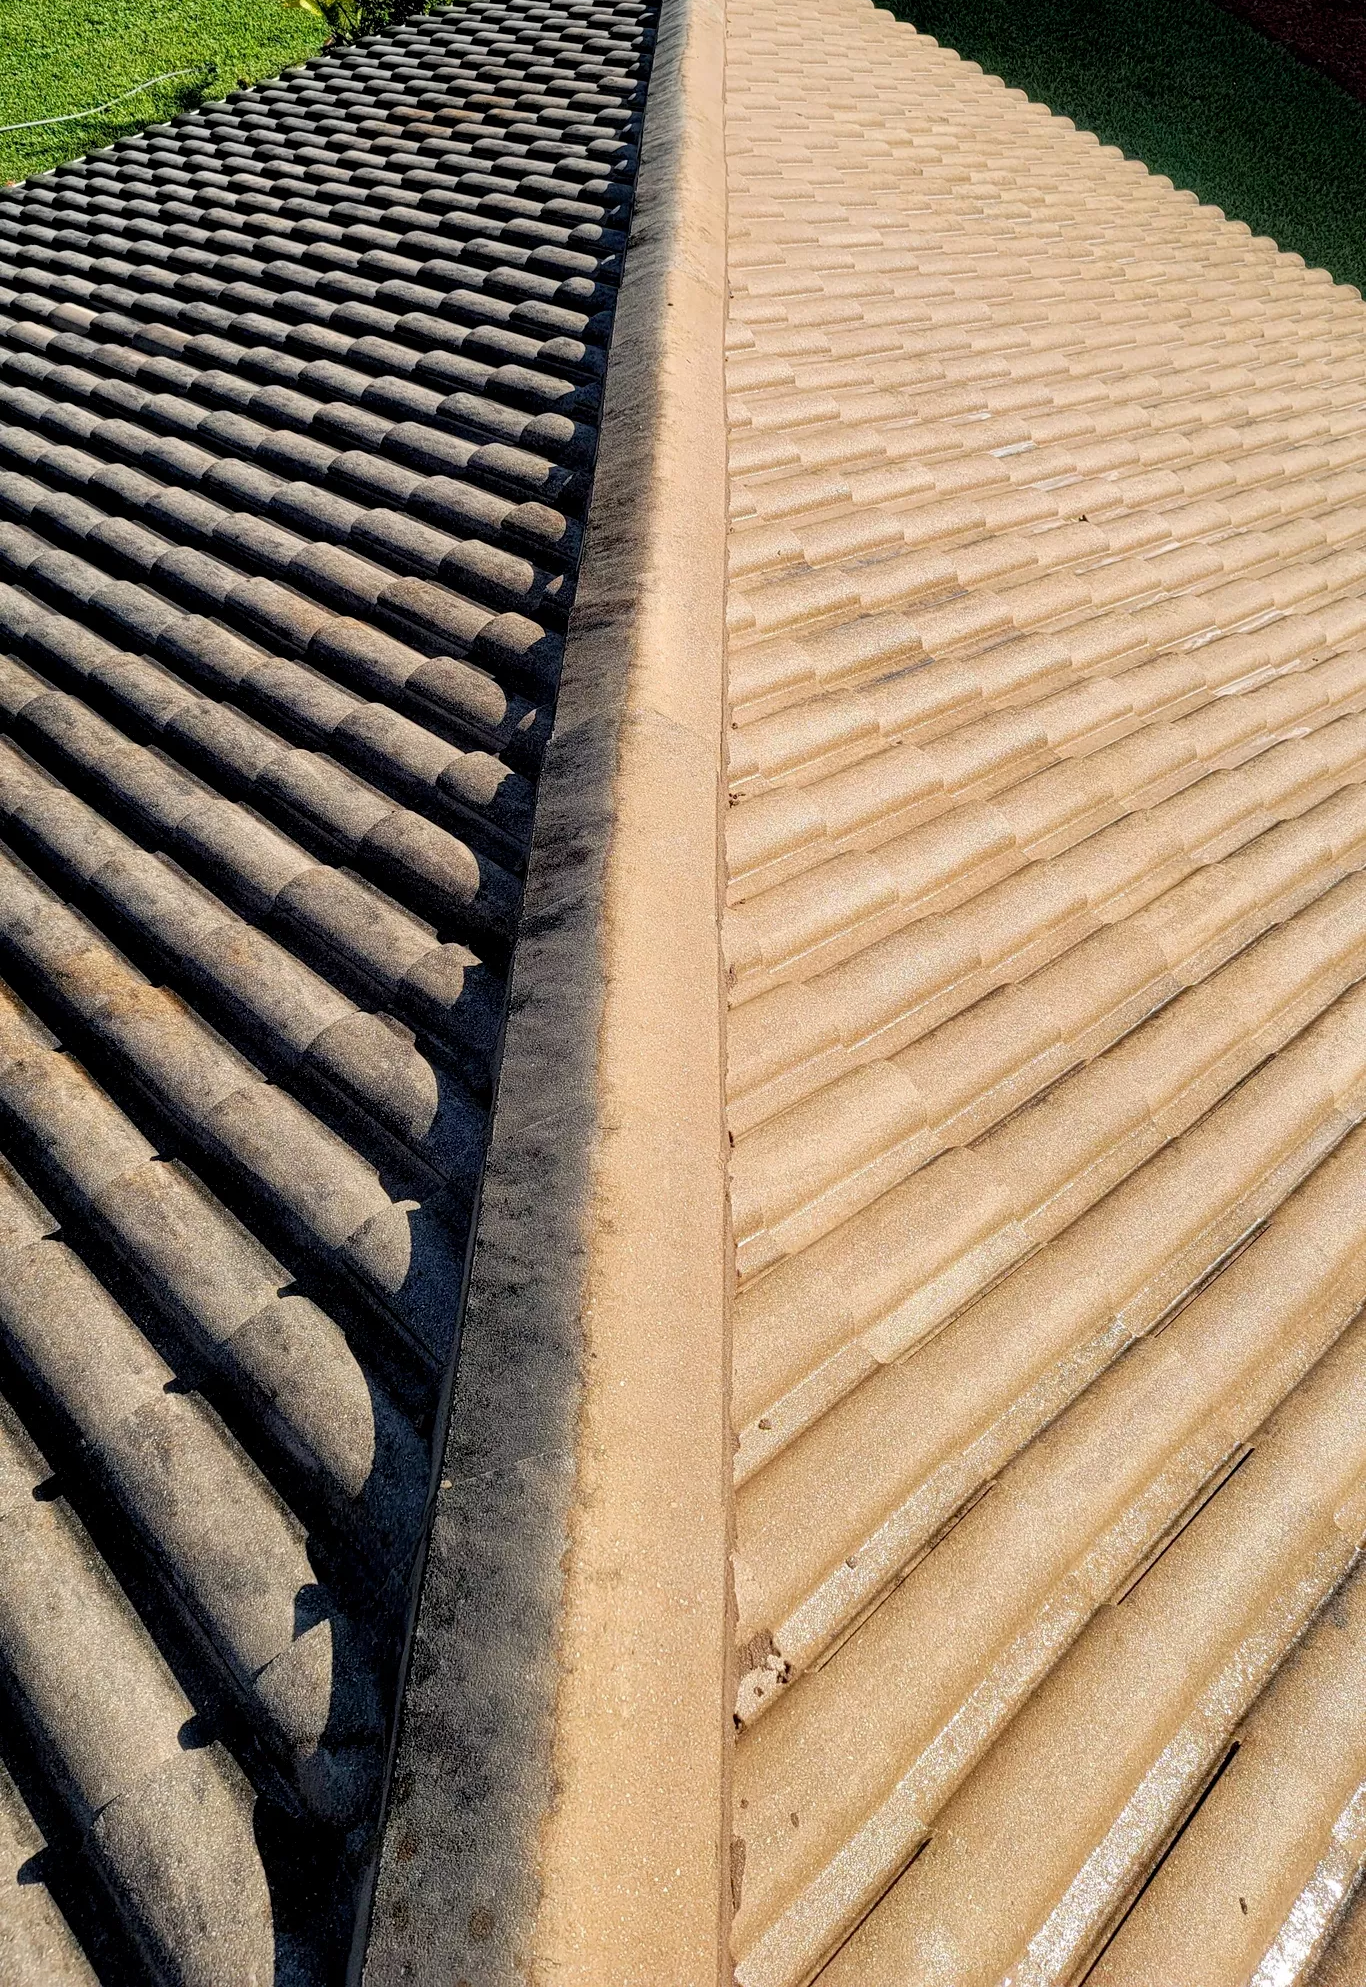 an image of a half cleaned roof